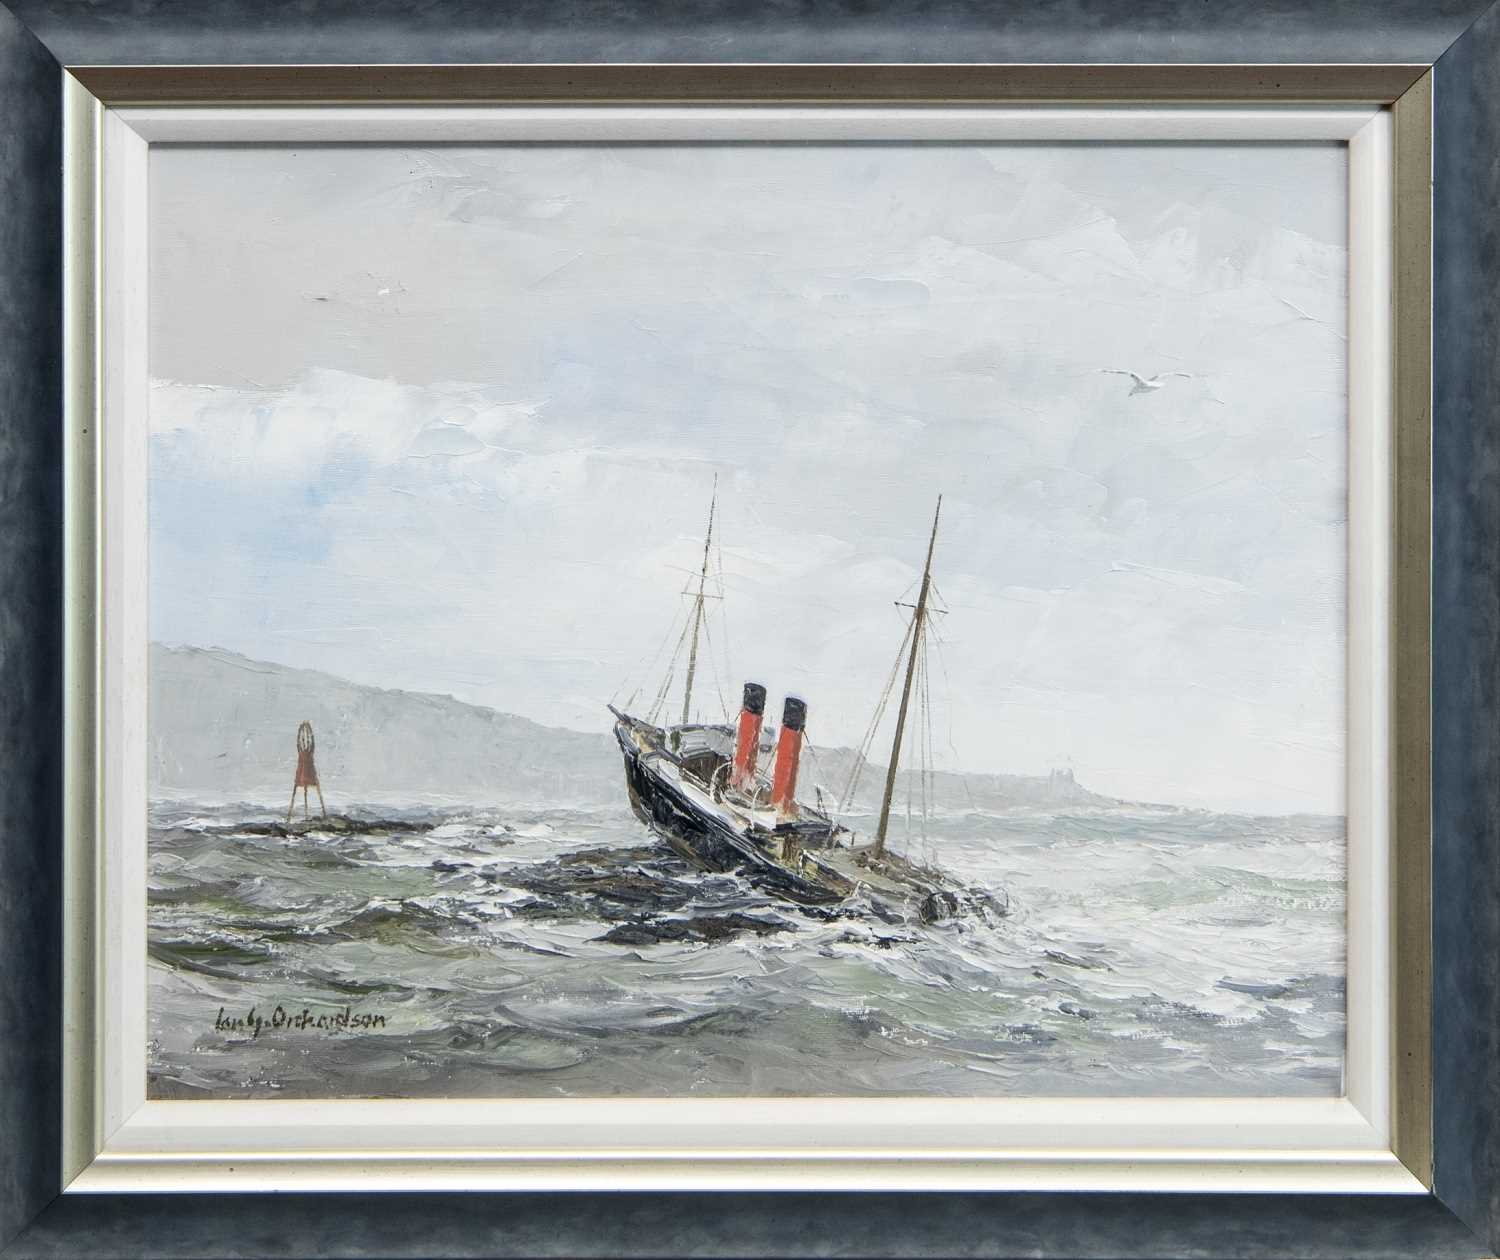 Lot 574 - CLYDESDALE - RAN ONTO LADY ROCK IN THE SOUND OF MULL, AN OIL BY IAN G ORCHARDSON